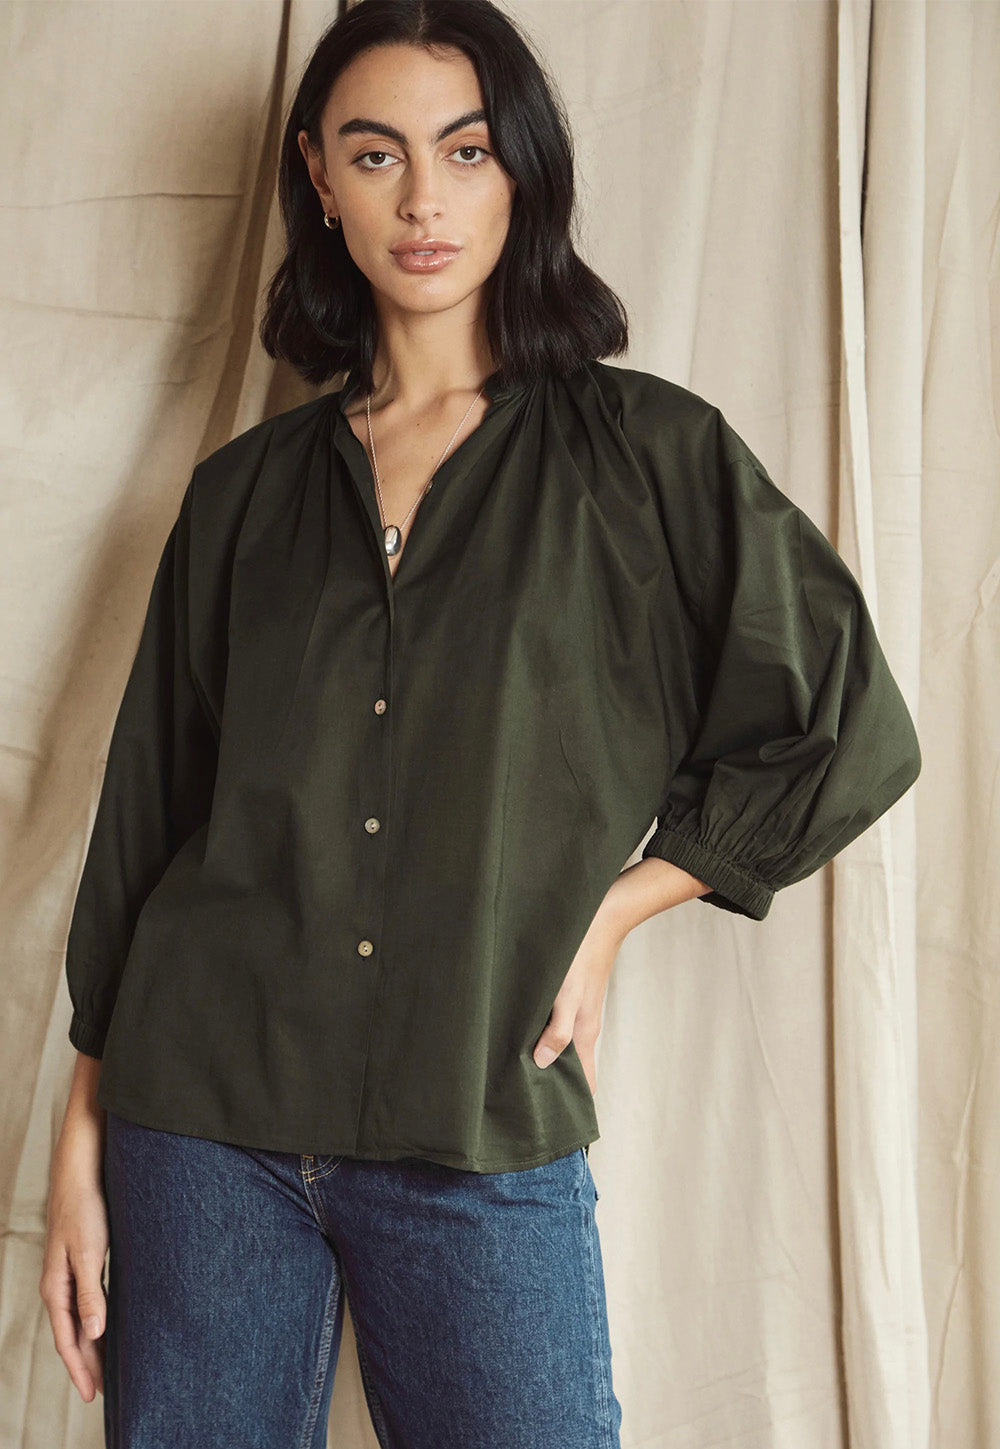 Everyday Blouse - Jungle Cotton Voile sold by Angel Divine